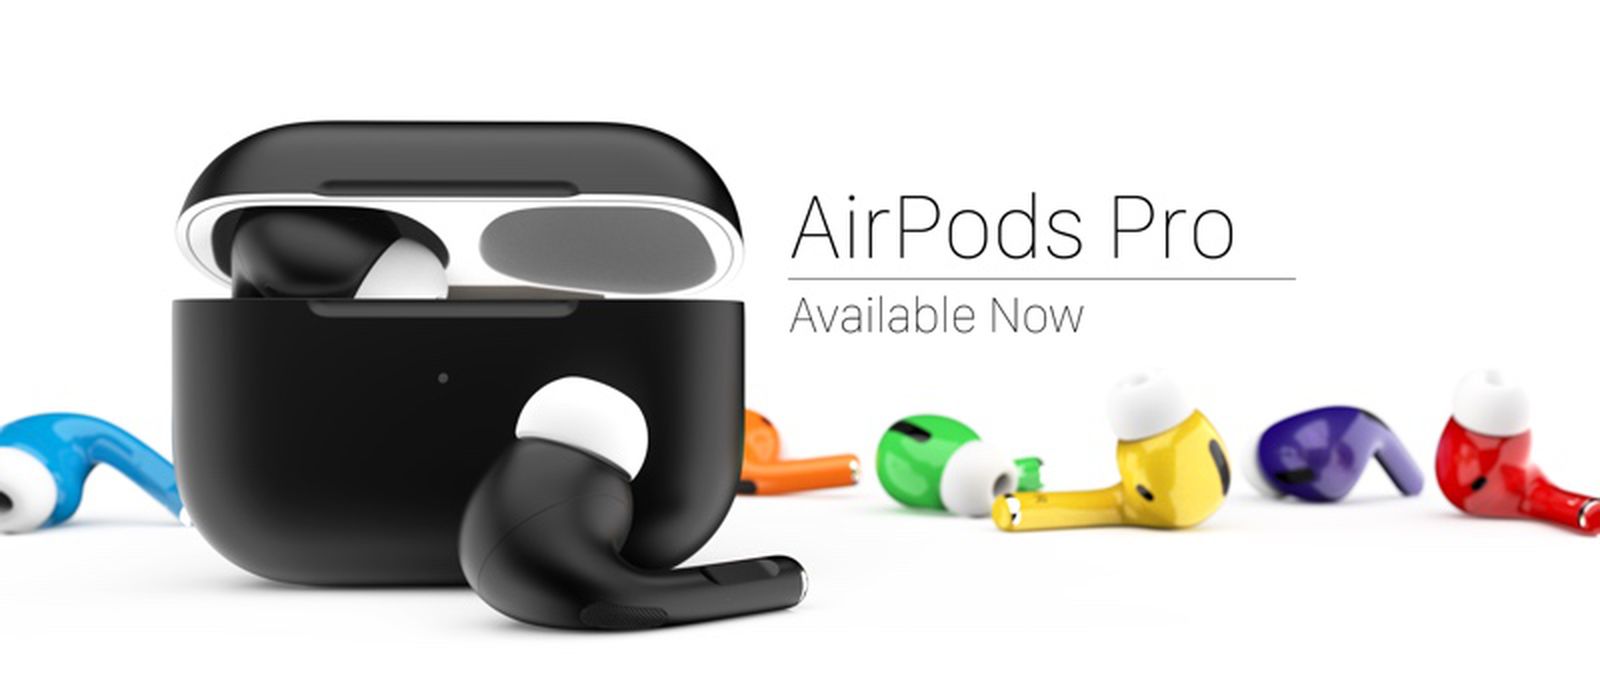 ColorWare Now Offering Custom-Painted AirPods Pro, Pricing Starts